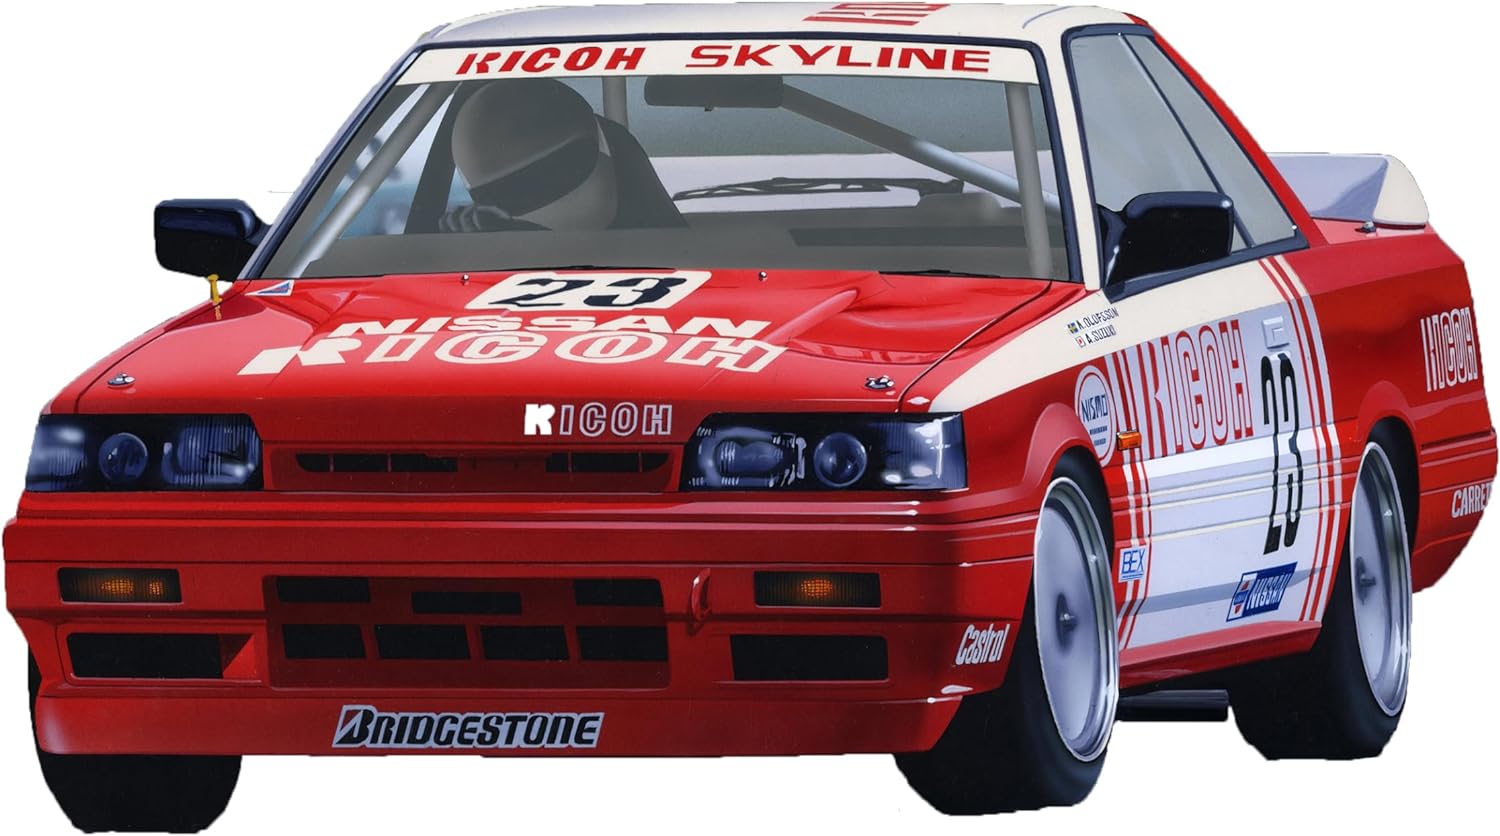 Fujimi ID-313 1/24 Inch Up Series No.313 RICOH NISSAN SKYLINE GTS-R (R31 Gr.A Specifications 1988)